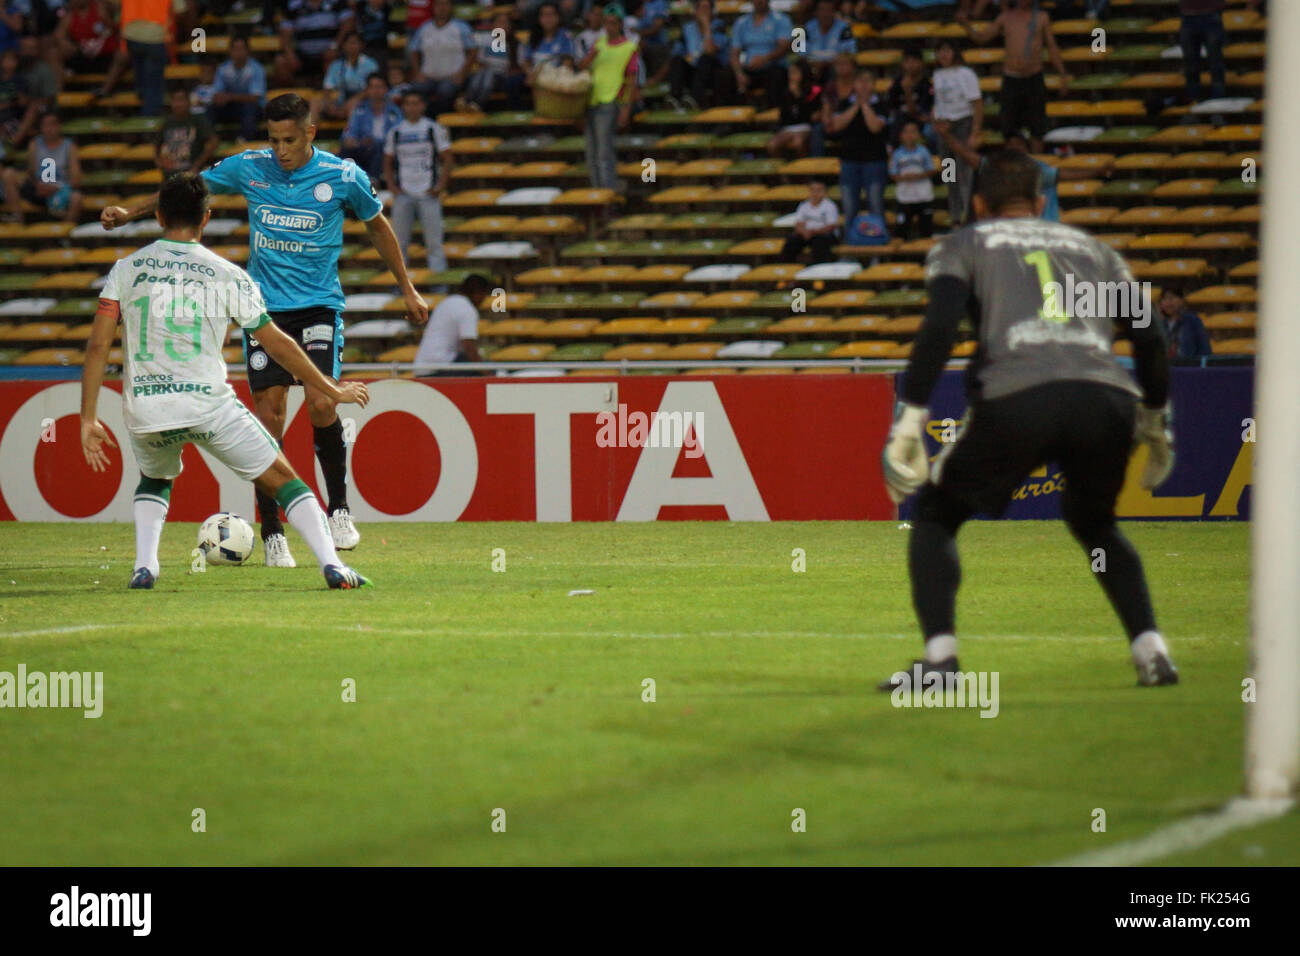 Cordoba, Argentina. 5th March, 2016. Fernando Andres Marquez, Front de Belgrano during a match between Belgrano and Sarmiento as part of the sixth round of Primera Division. in Mario Kempes Stadium on March 05, 2014 in Cordoba, Argentina. Stock Photo